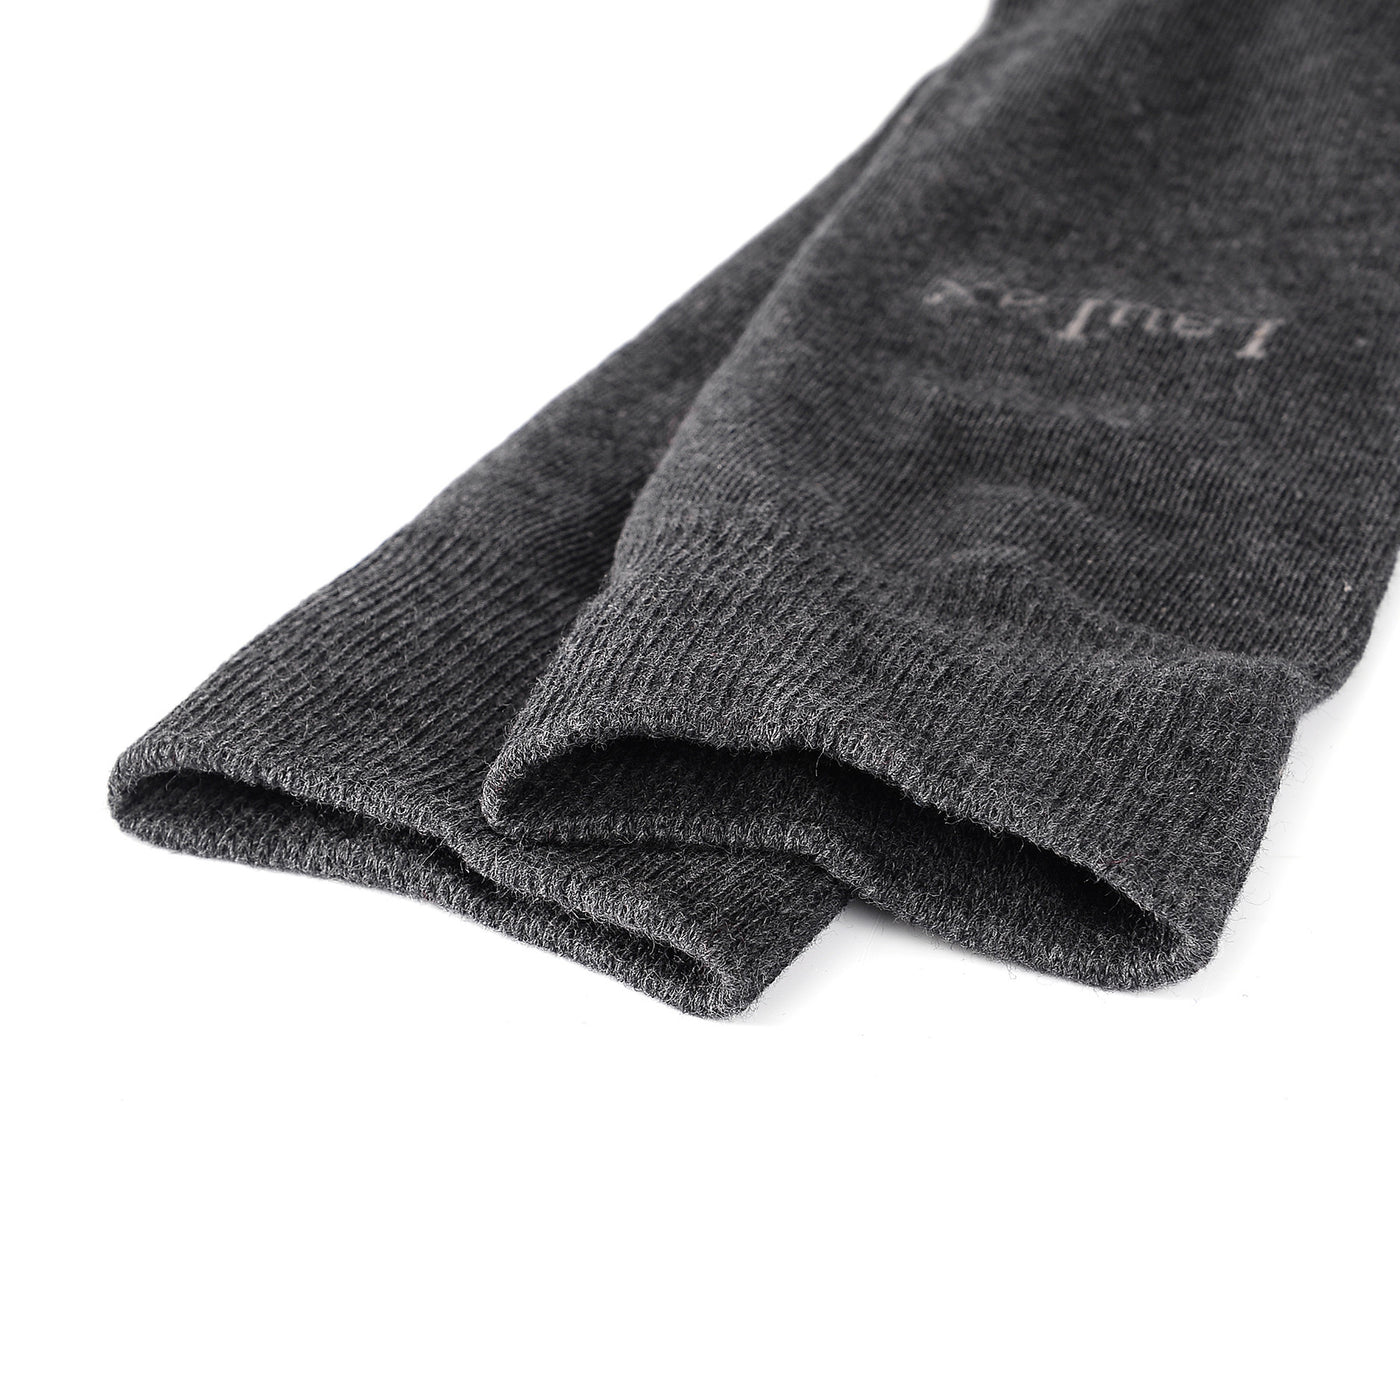 4 Pairs Finest Combed Cotton Smooth Seamless Toe Business Socks, Dark Grey / Anthracite, Gift Set